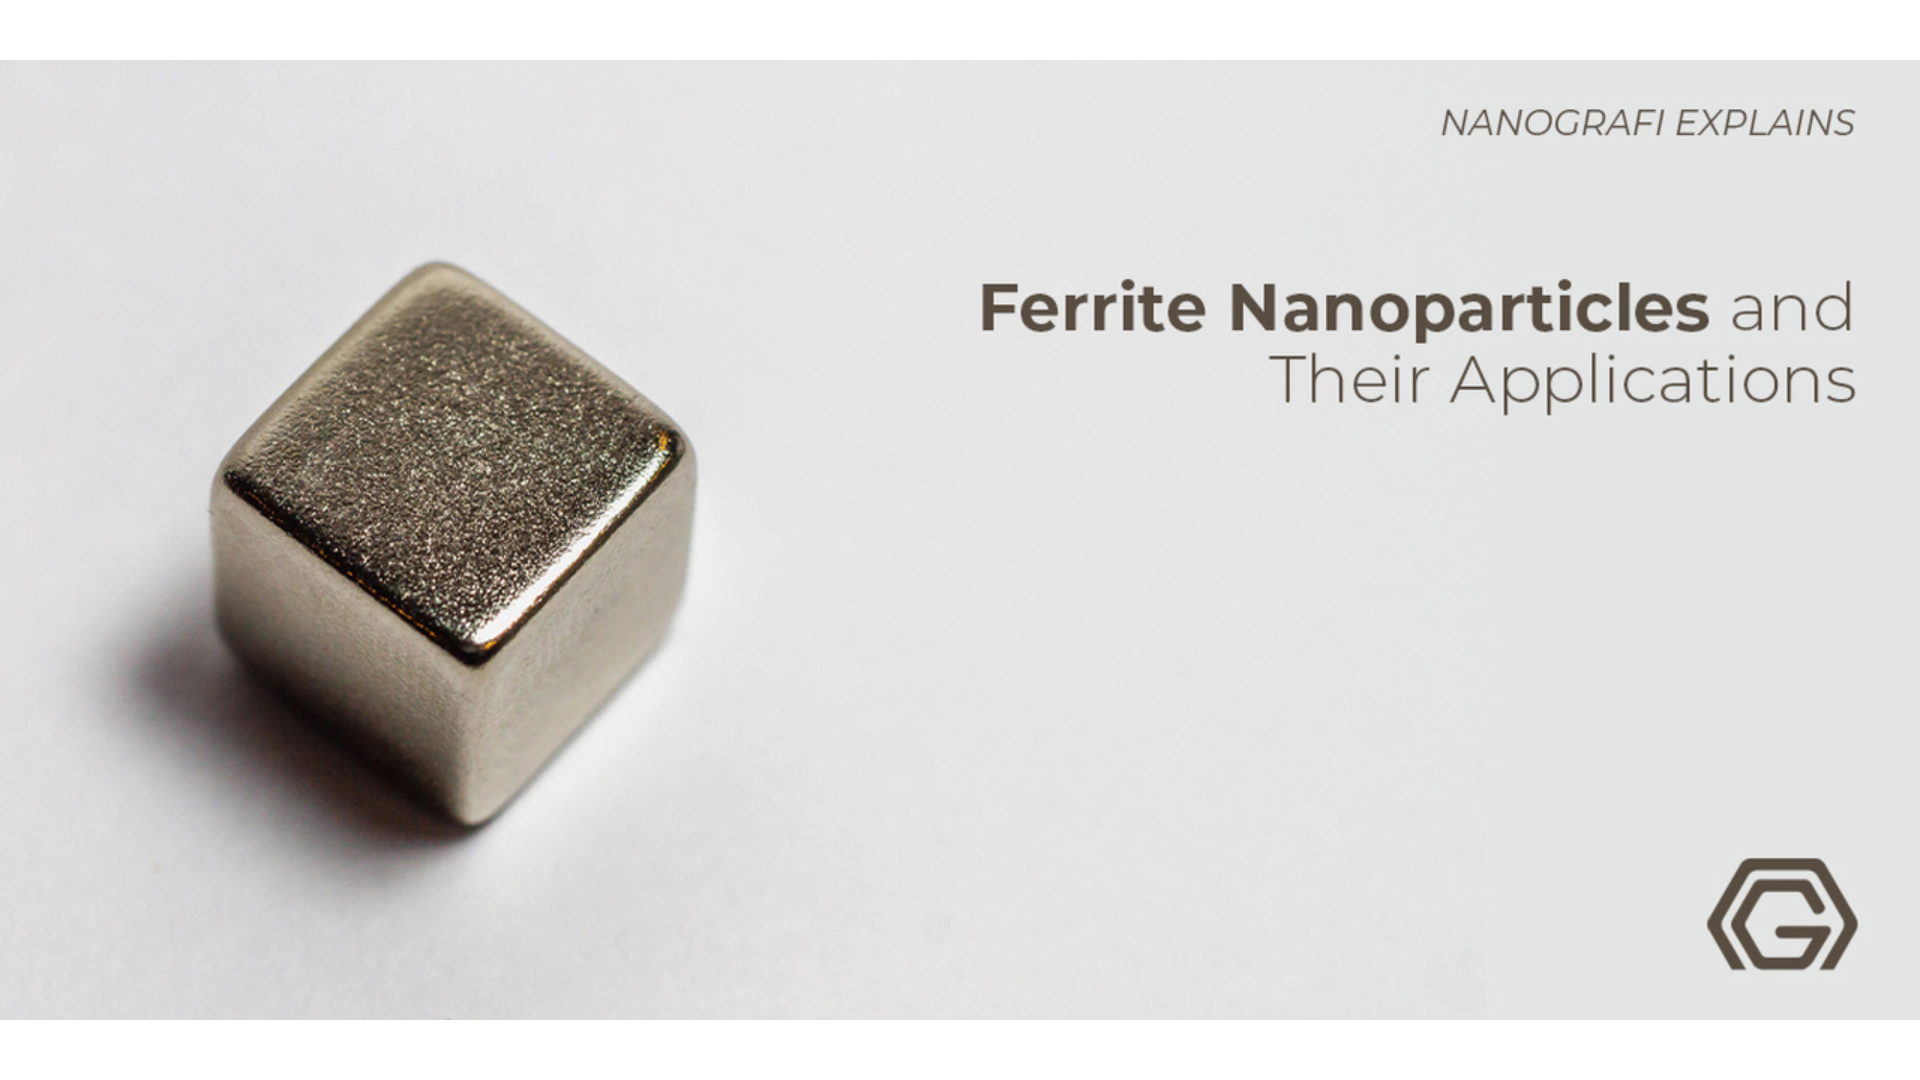 Ferrite nanoparticles and their applications